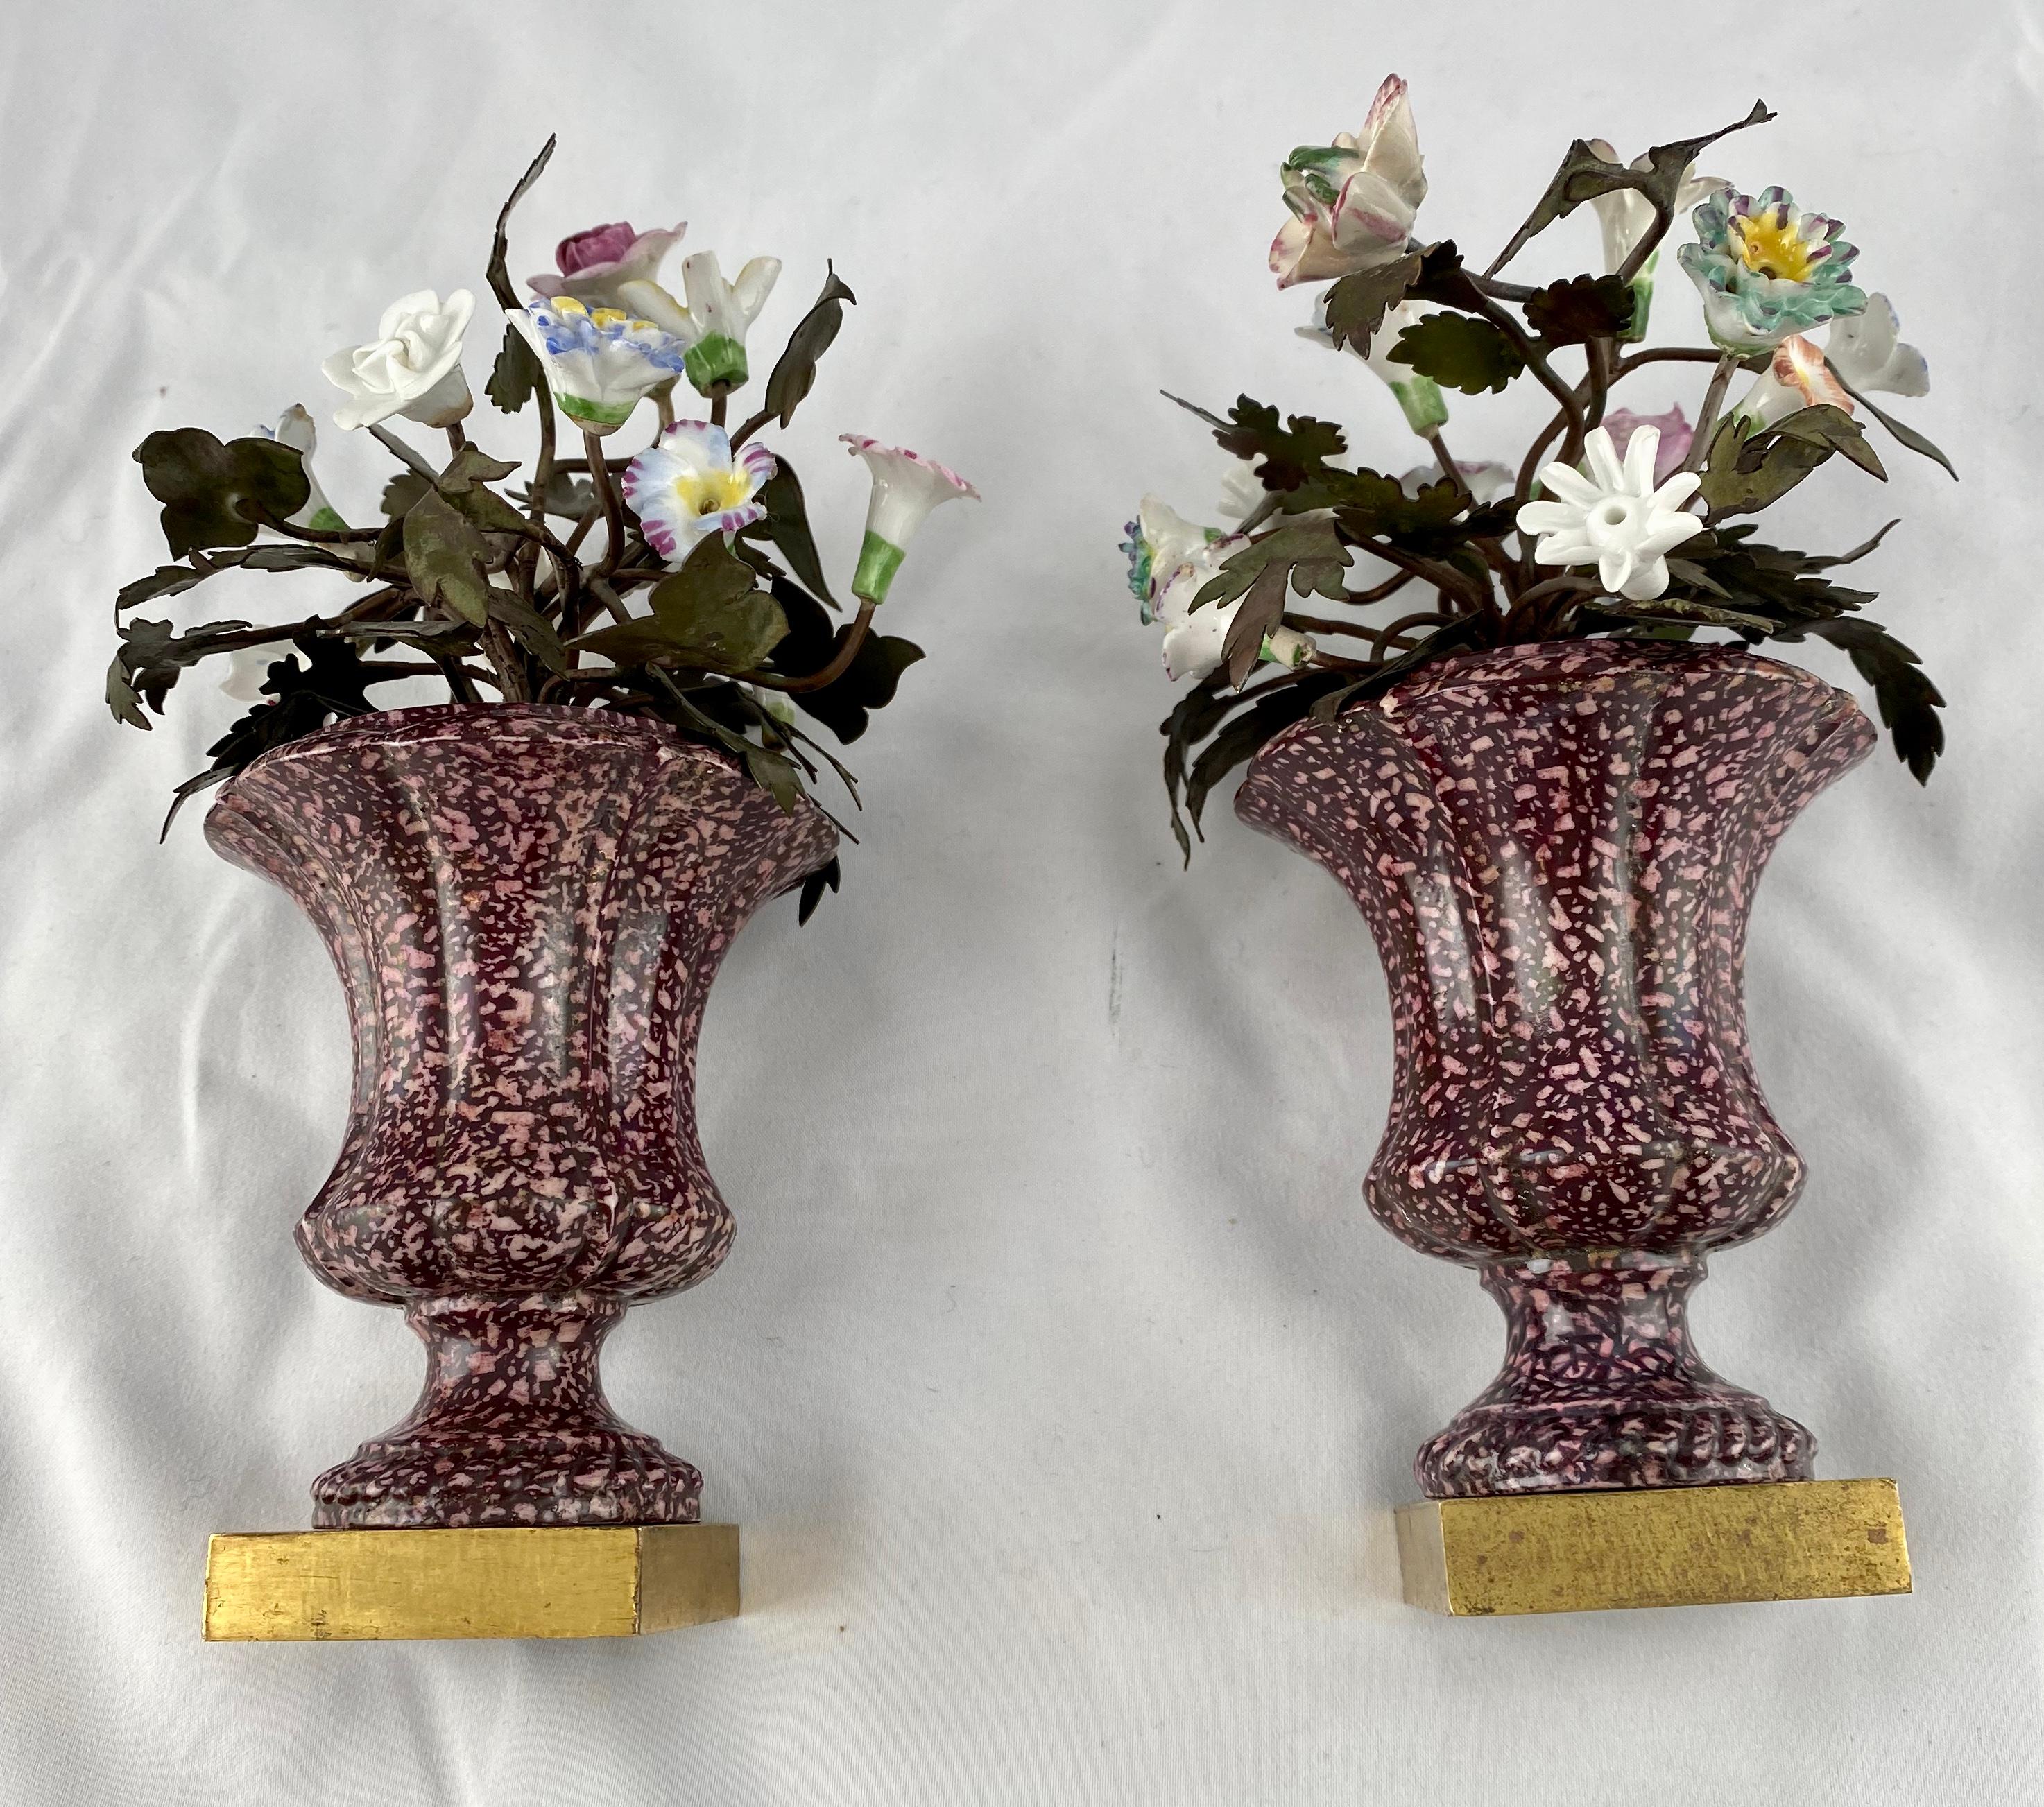 Pair of Porcelain Vases with Porcelain Flowers and Leafs of Metal, 19th C 1